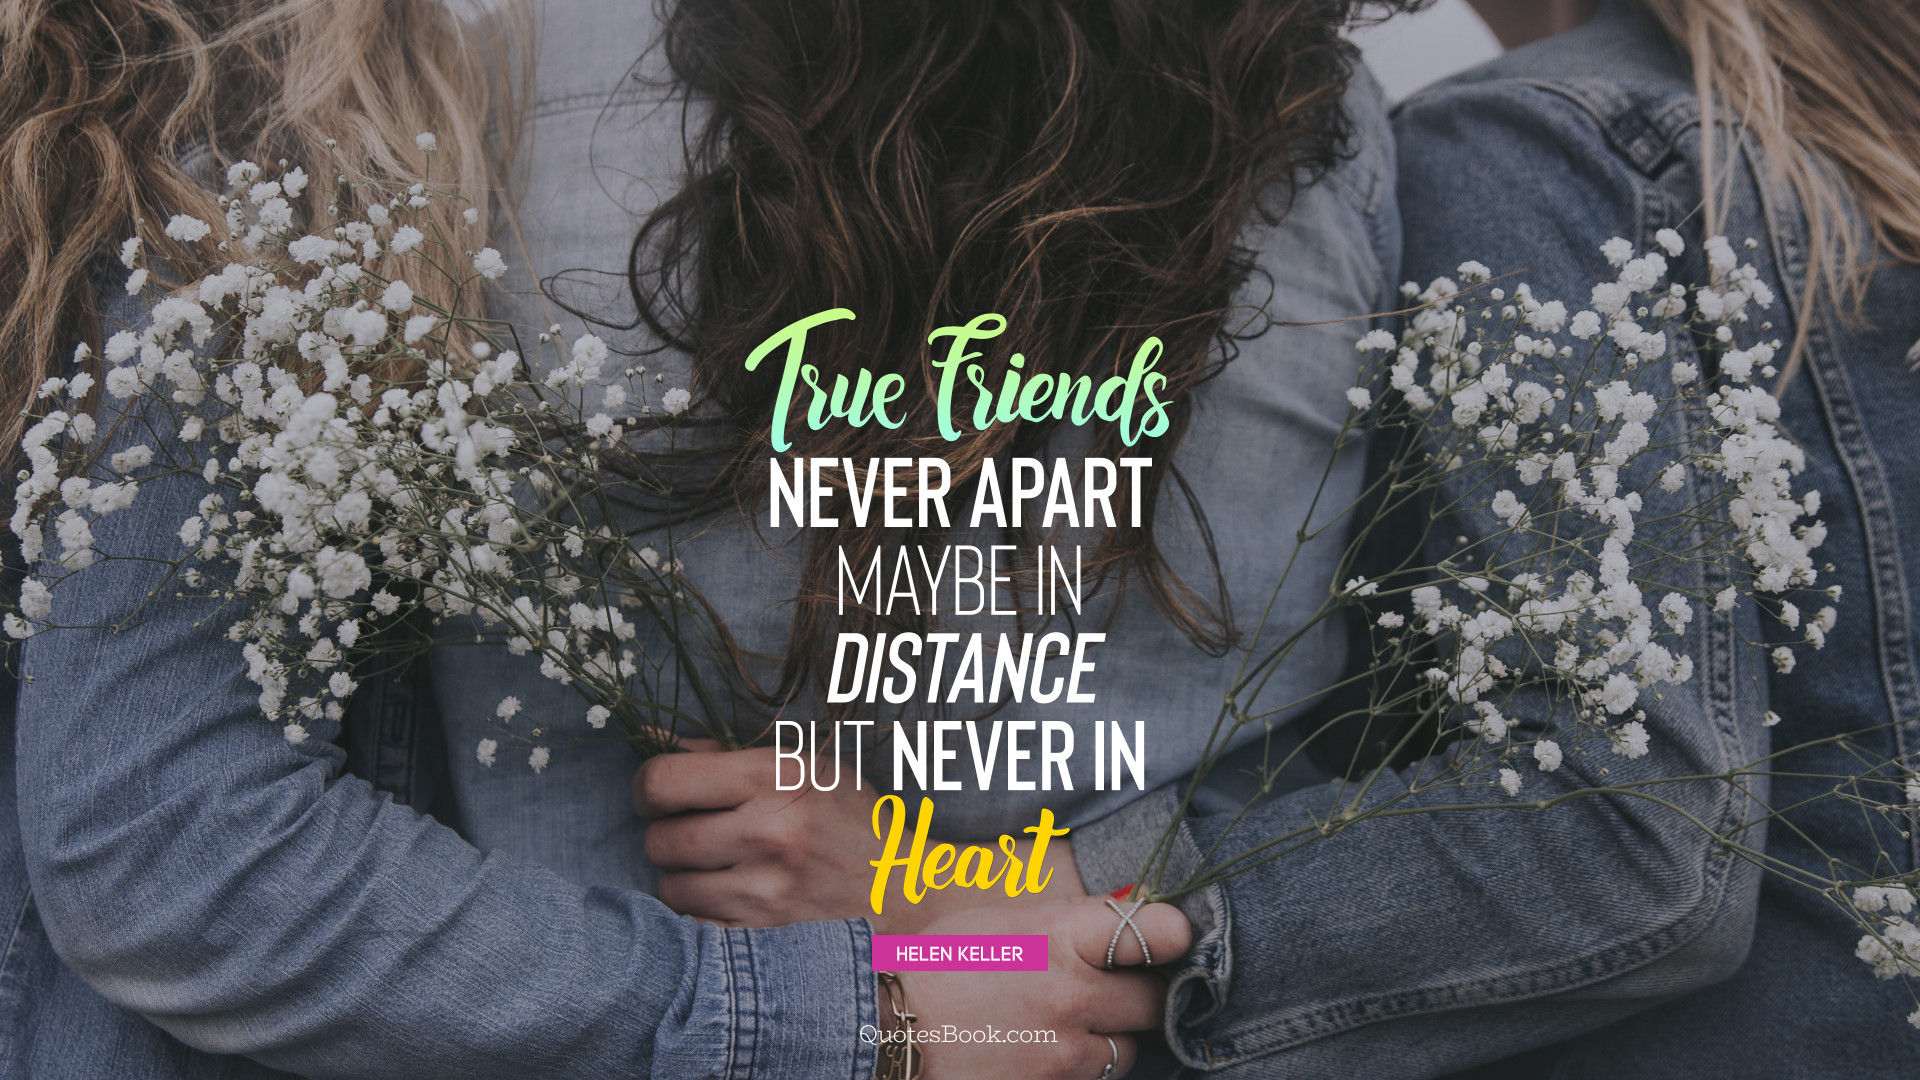 True friends never apart maybe in distance but never in heart. - Quote